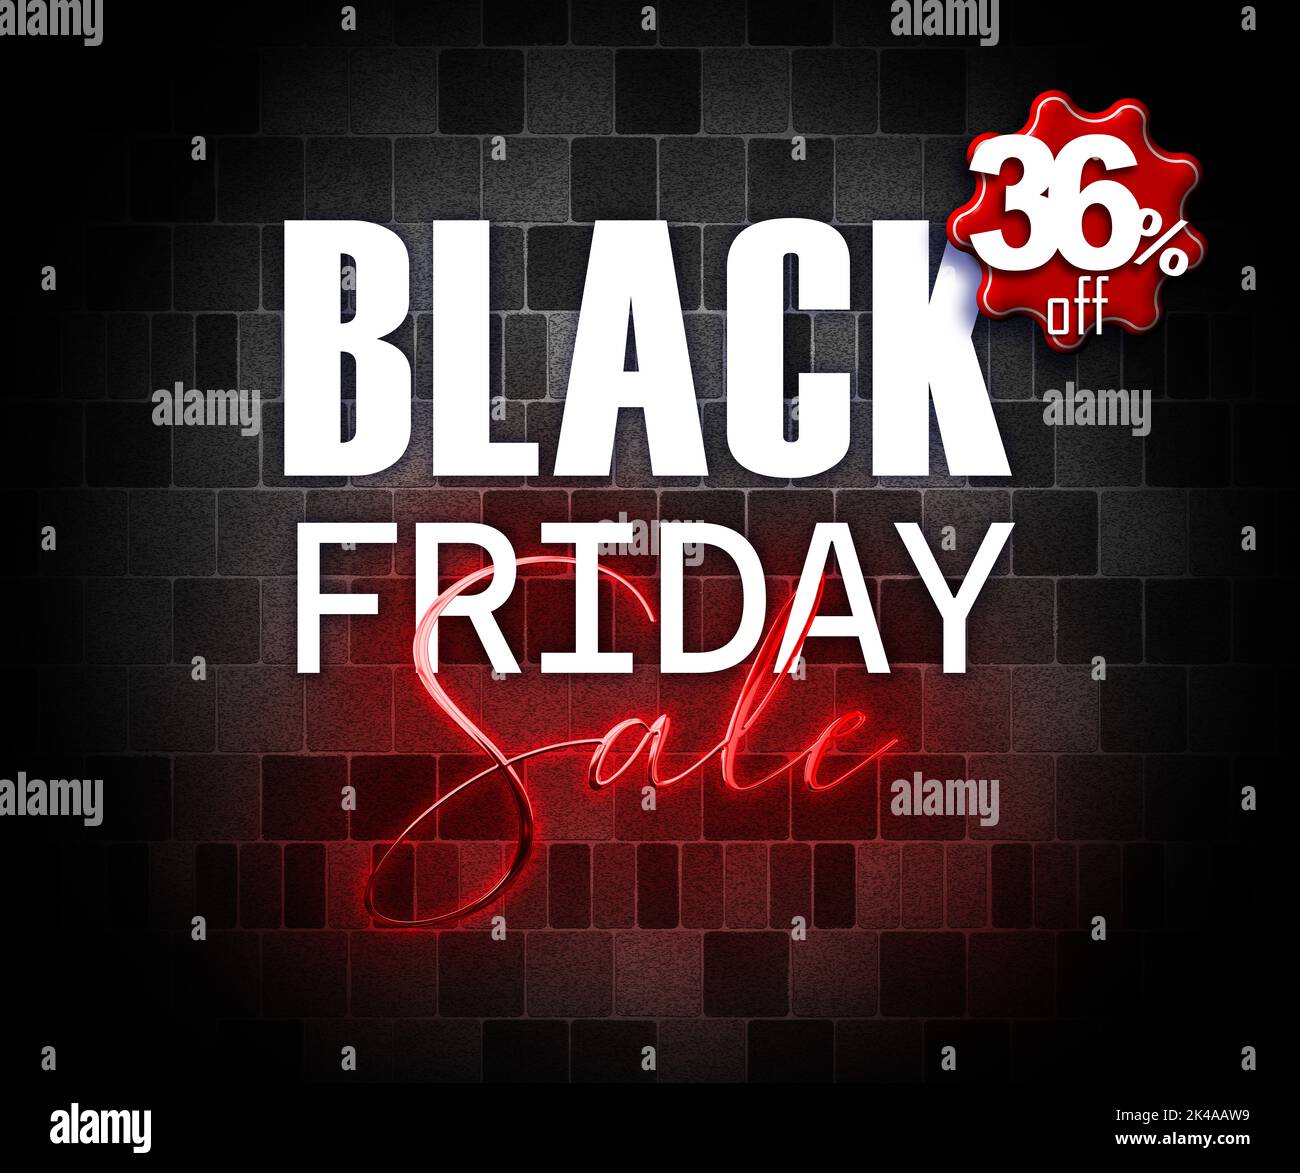 illustration with 3d elements black friday promotion banner 36 percent off sales increase Stock Photo